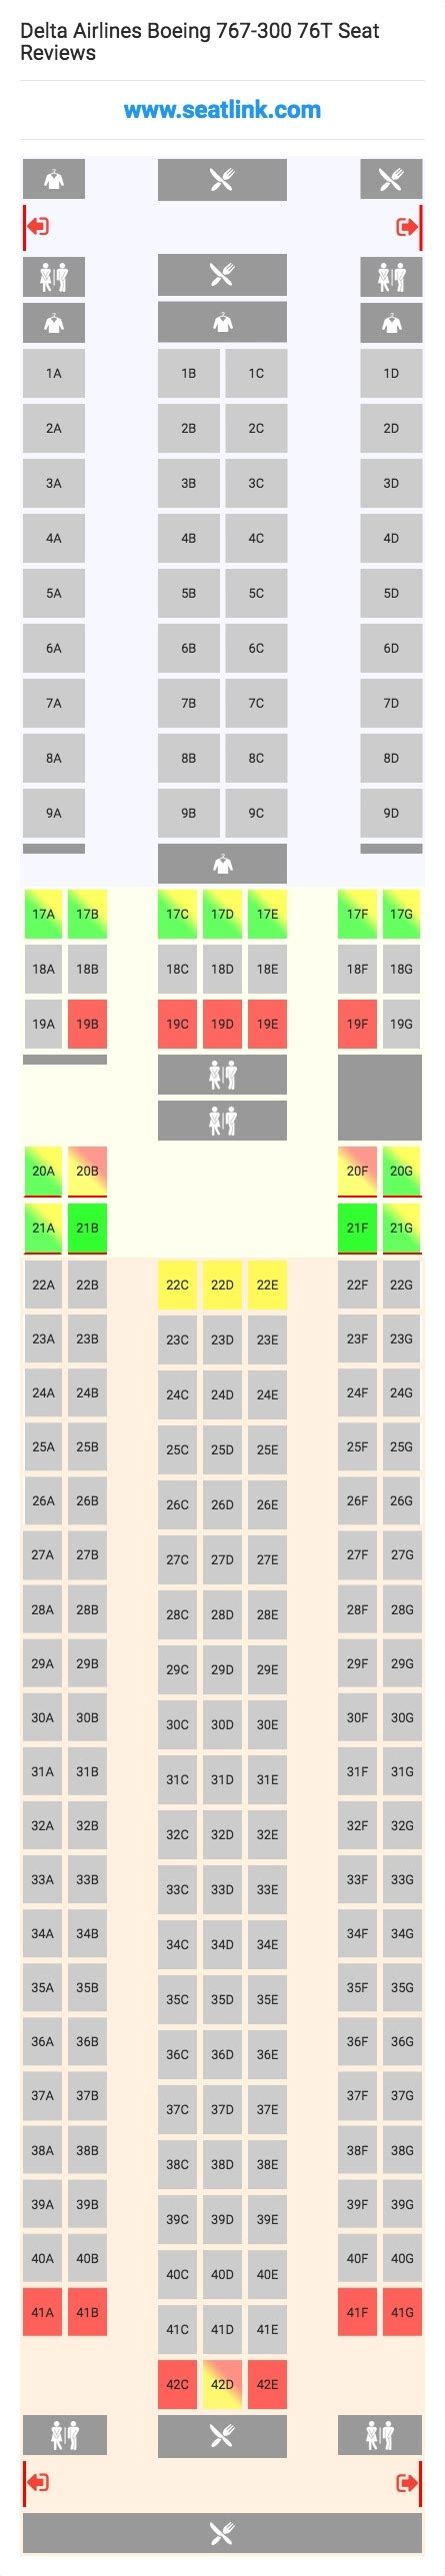 6 Pics Delta Airlines Seating Chart 76w And Review Alqu Blog